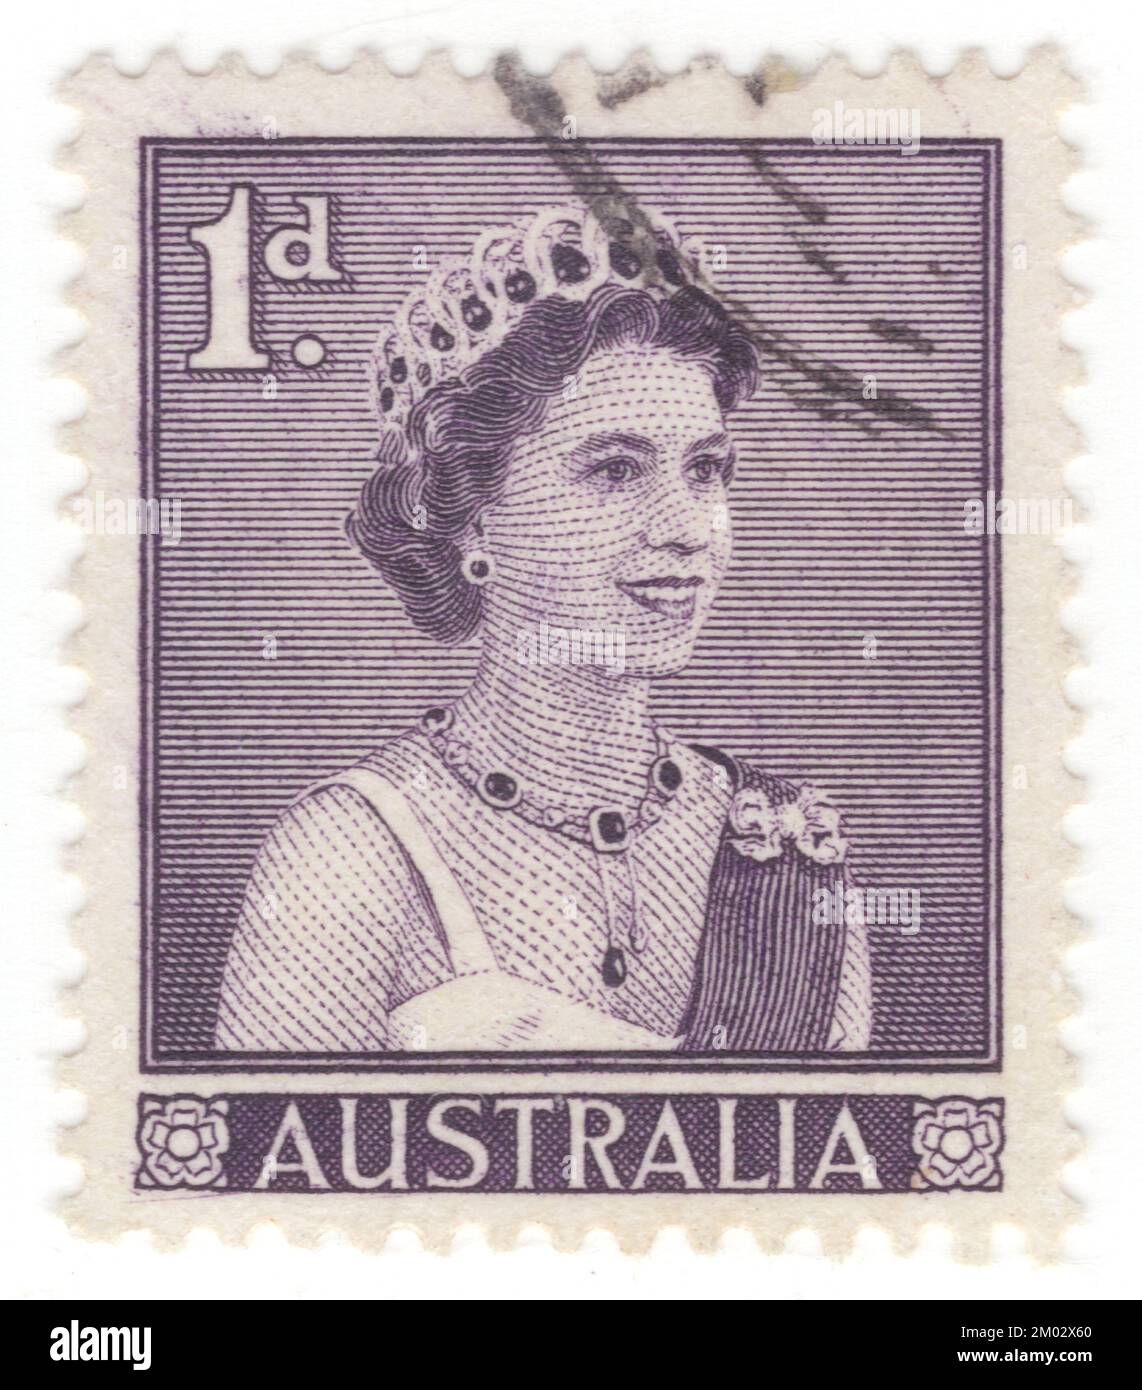 AUSTRALIA — 1959 February 2: An 1 pence dull violet postage stamp depicting portraits of Queen Elizabeth II, reigning monarch of Australia. Elizabeth II (Elizabeth Alexandra Mary) was Queen of the United Kingdom and other Commonwealth realms from 6 February 1952 until her death in 2022. She was queen regnant of 32 sovereign states during her lifetime, and was head of state of 15 realms at the time of her death. Her reign of 70 years and 214 days was the longest of any British monarch and the longest verified reign of any female monarch in history Stock Photo